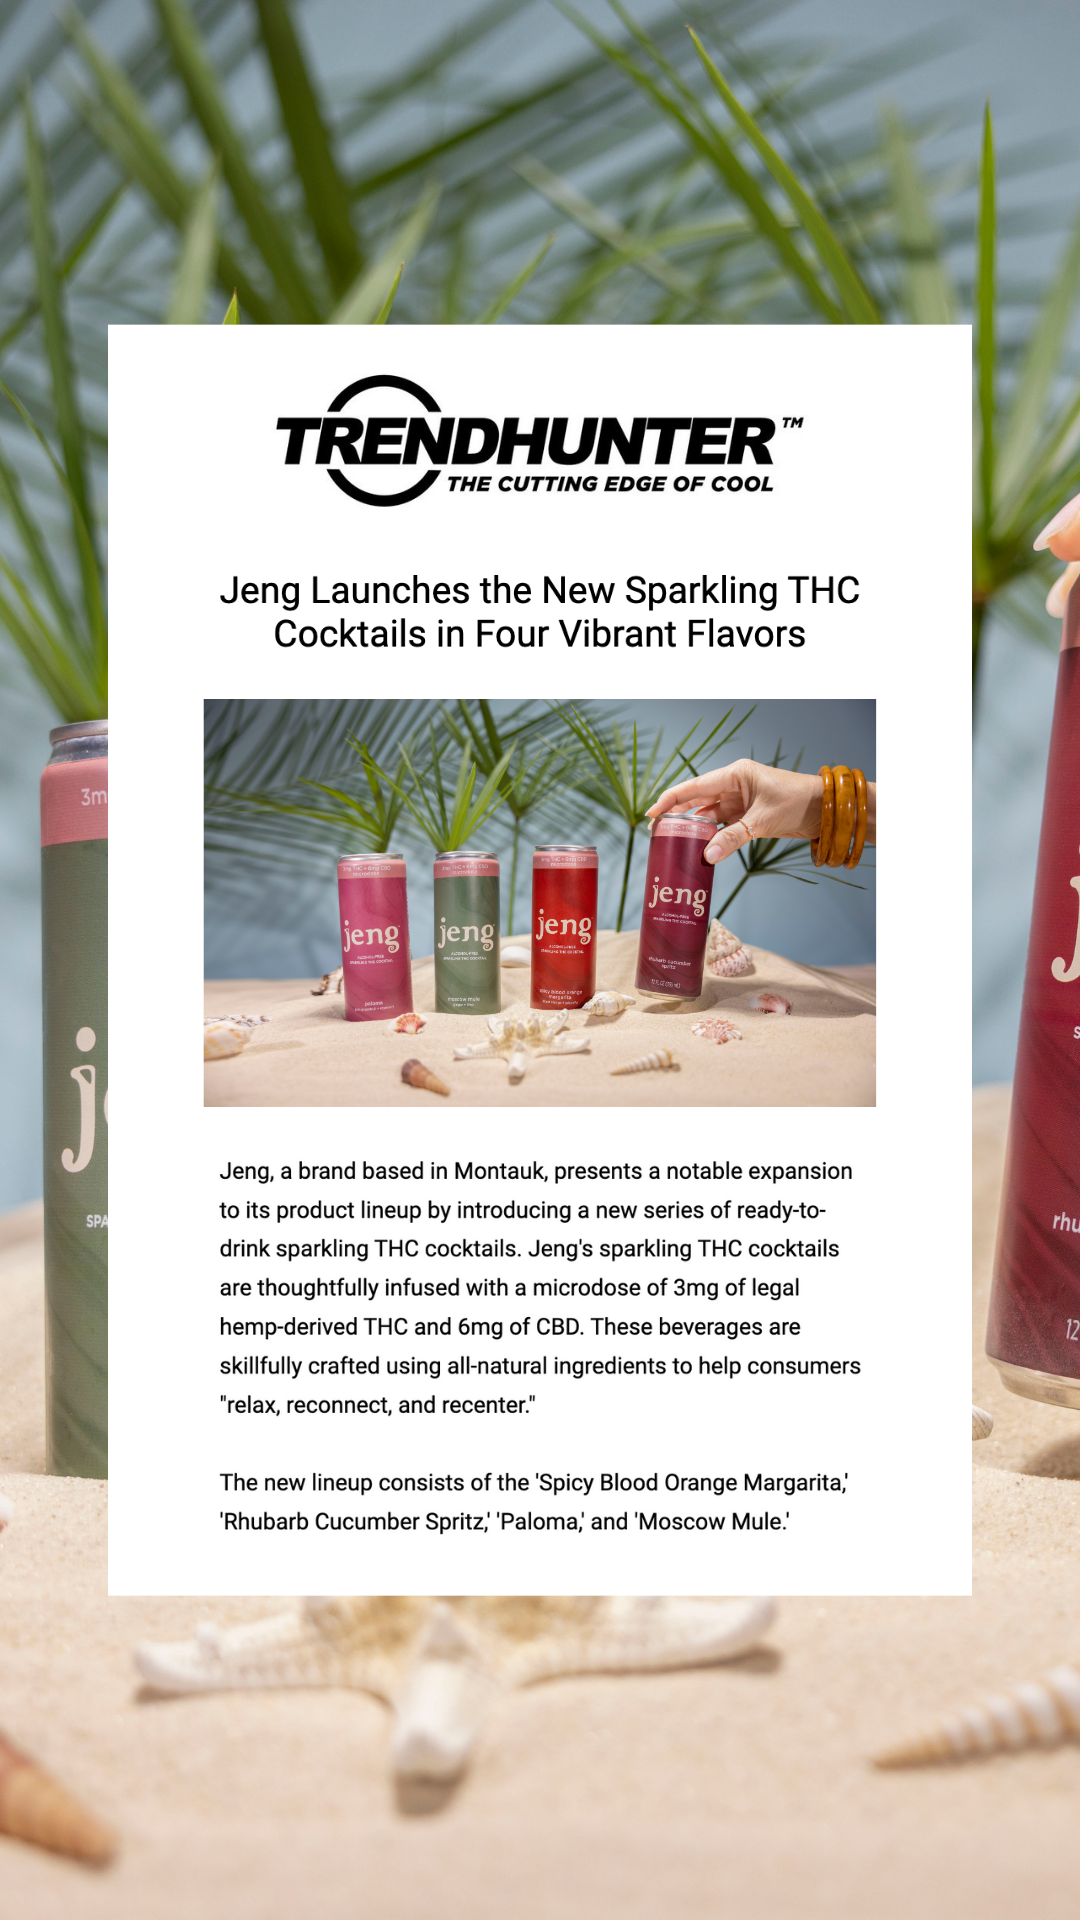 Jeng Featured in TrendHunter